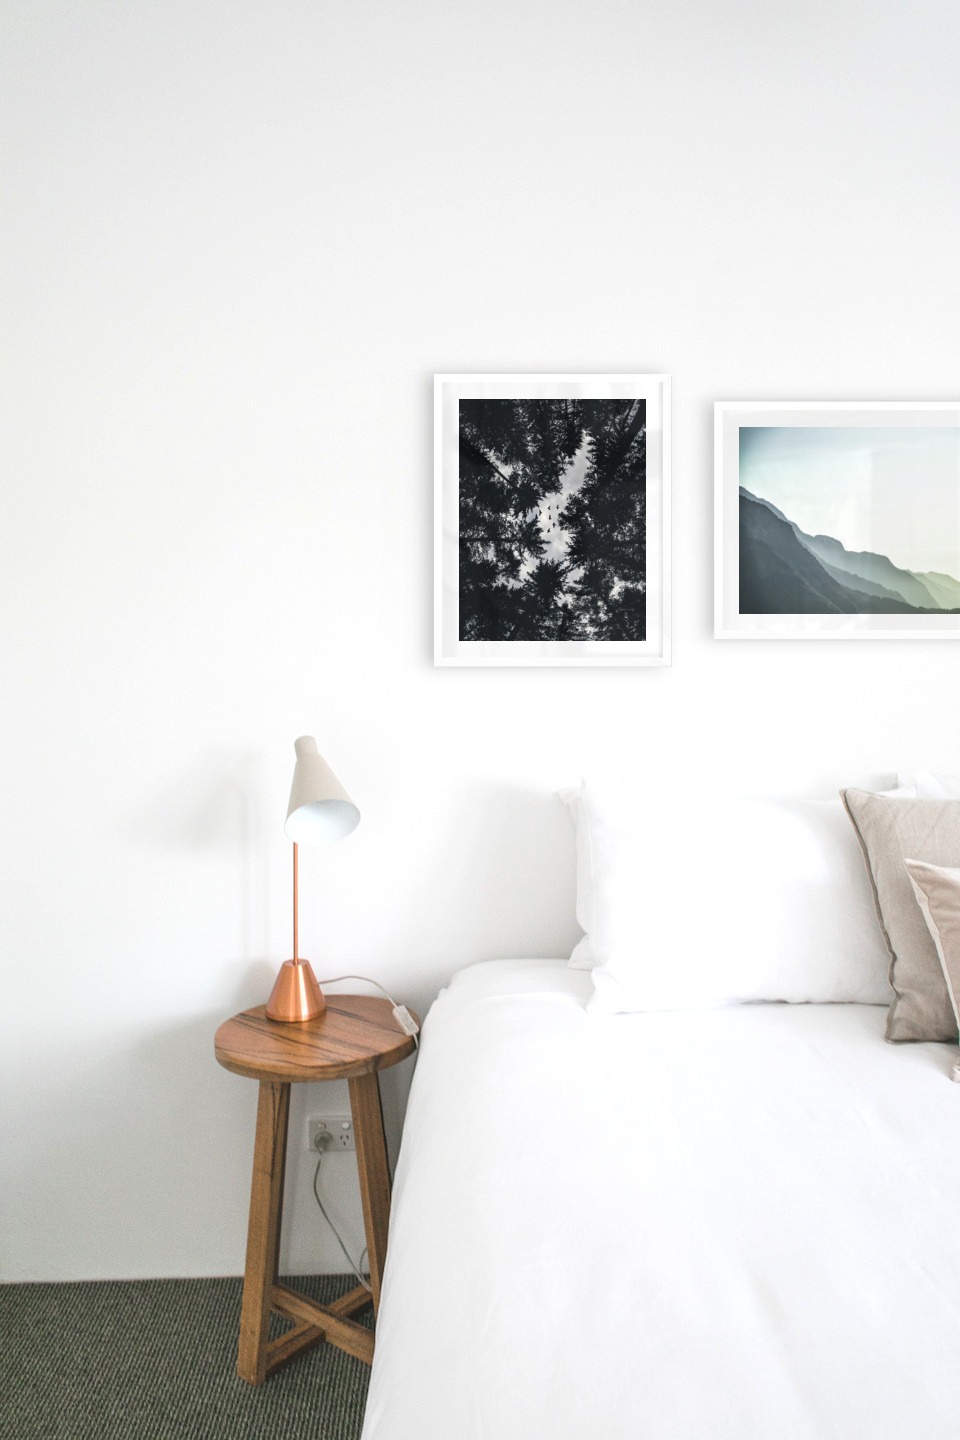 Gallery wall with picture frames in white in sizes 40x50 with prints "Wooden tops and birds" and "Foggy mountain"